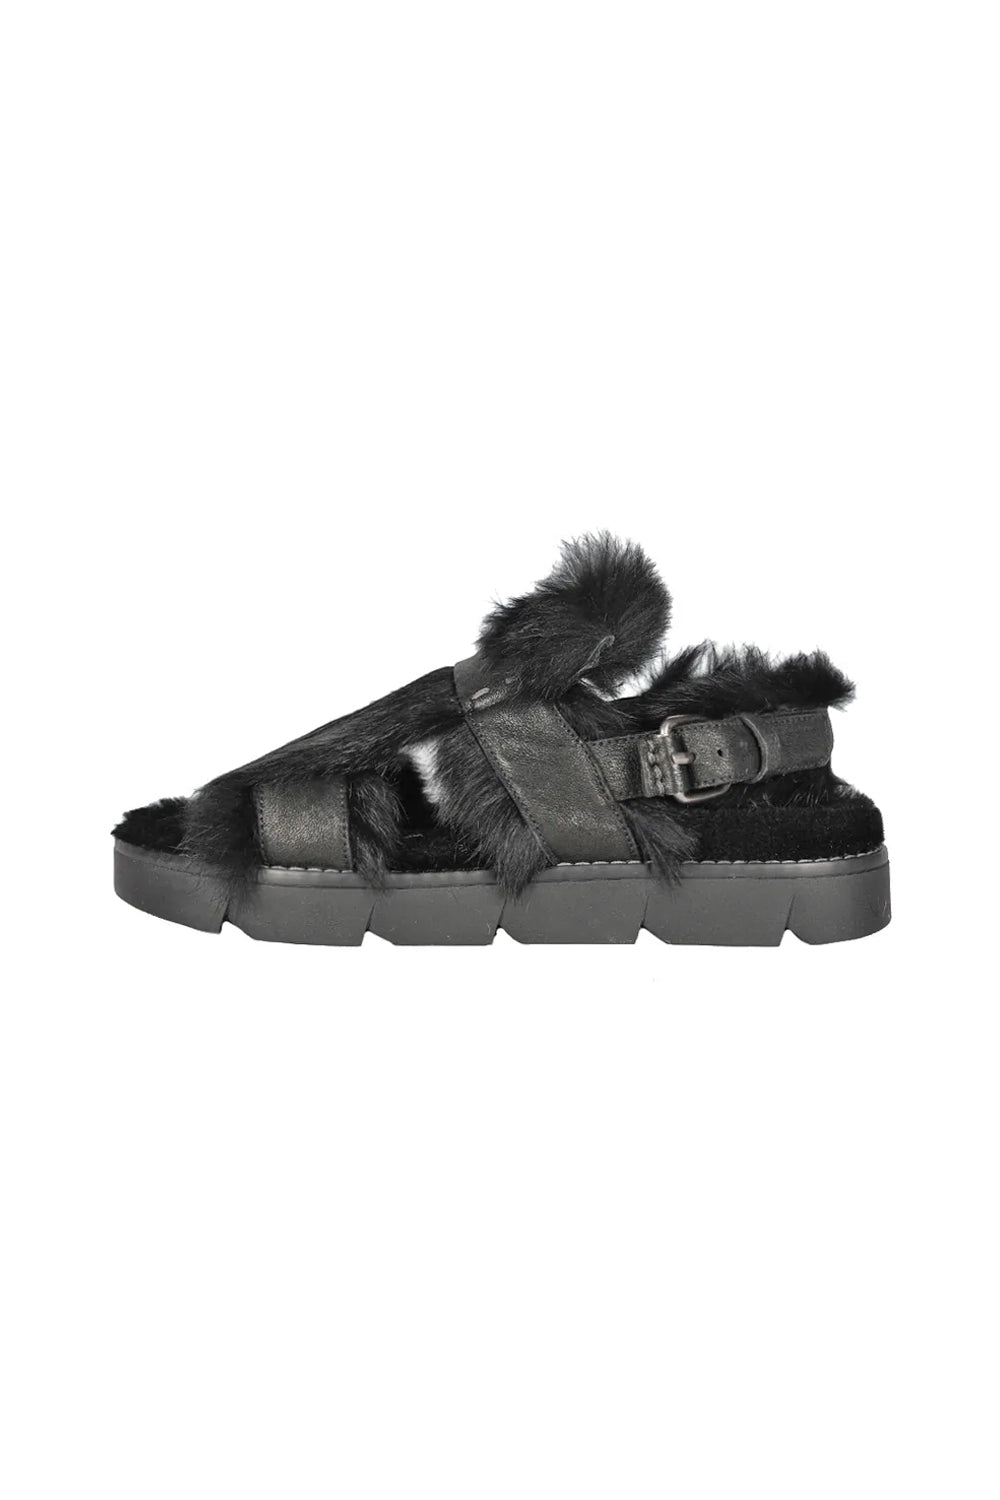 HENRY BEGUELIN Leather Vegetal Wash Sandal with Fur in Nero